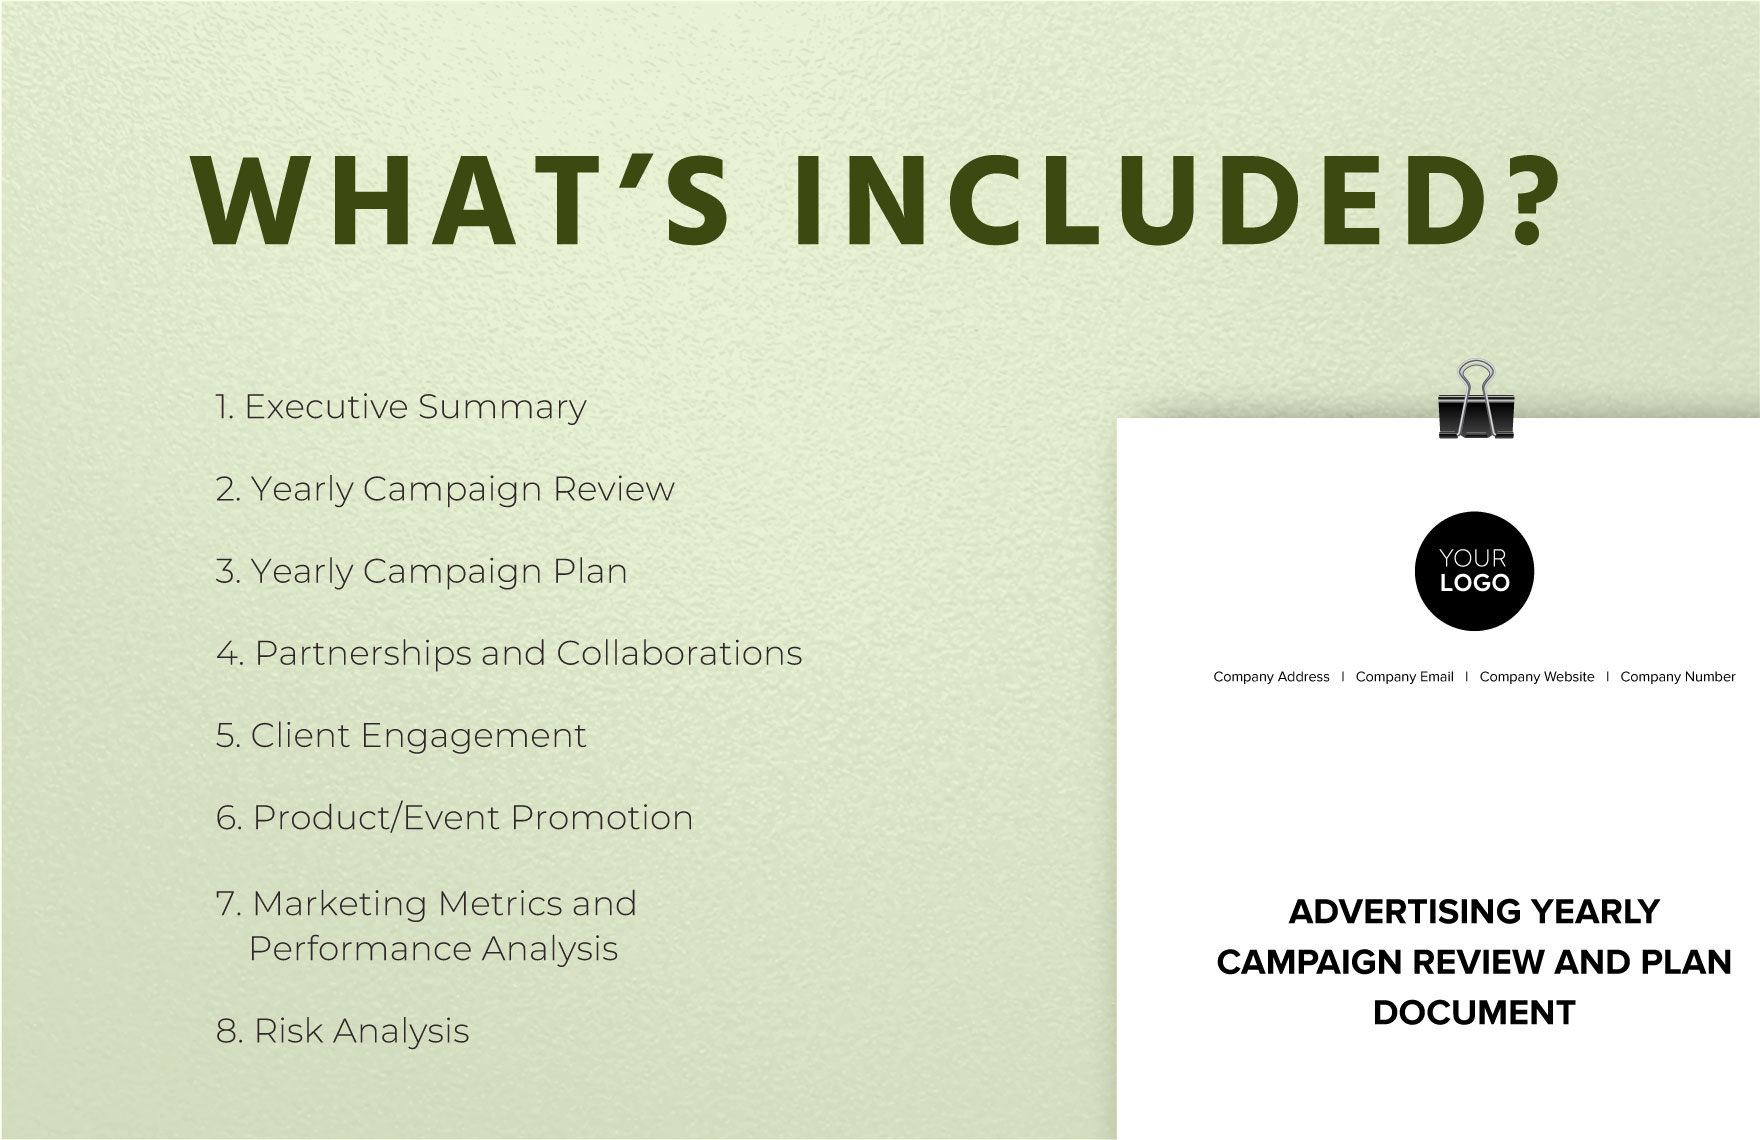 Advertising Yearly Campaign Review and Plan Document Template